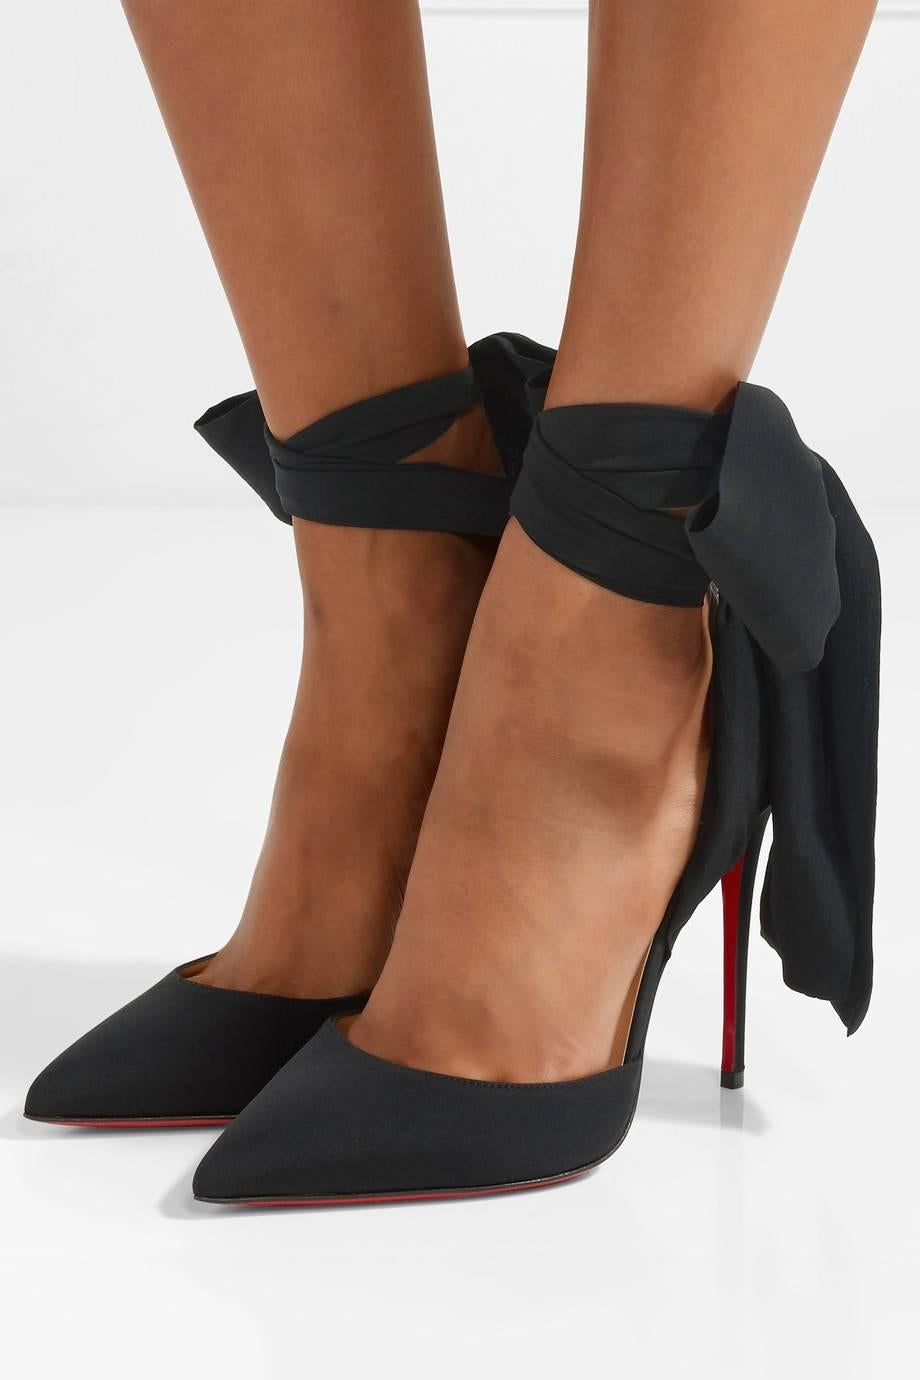 Christian Louboutin New Fabric Silk Crepe Wrap Around Evening Pumps Heels in Box

Size IT 36.5
Fabric
Silk crepe
Tie closure
Made in Italy
Heel height 4